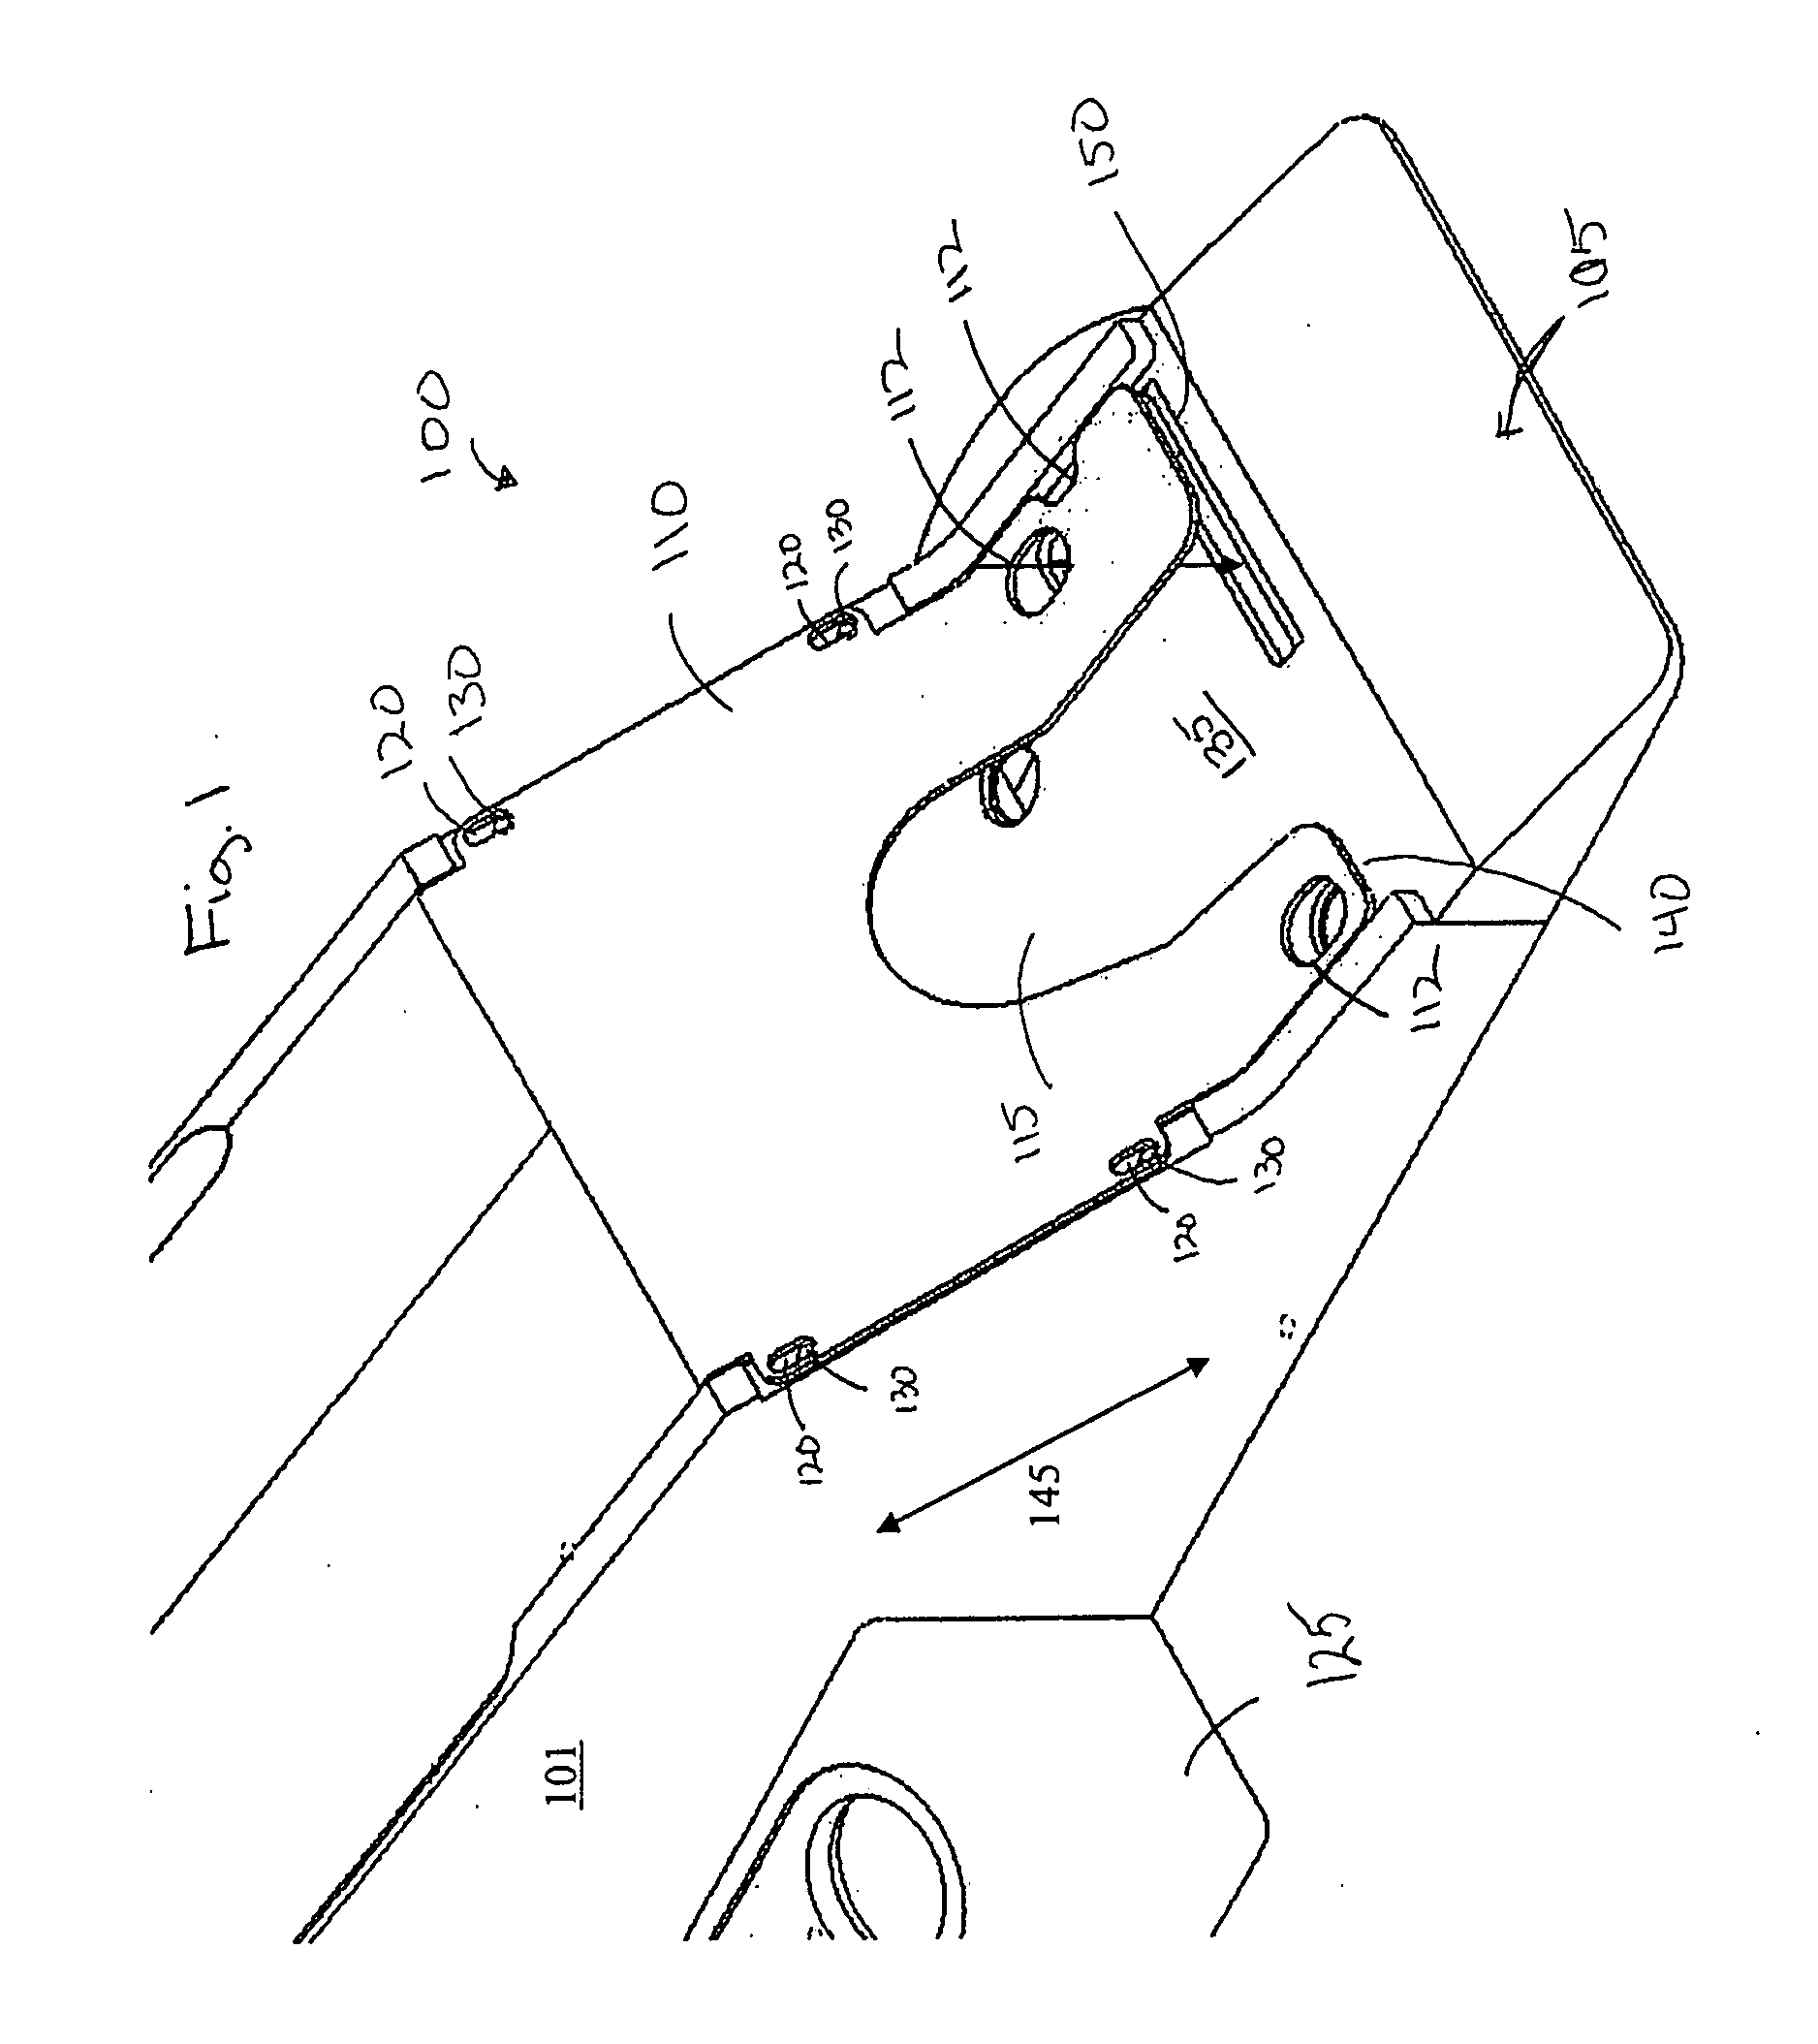 Card delivery shoe and methods of fabricating the card delivery shoe